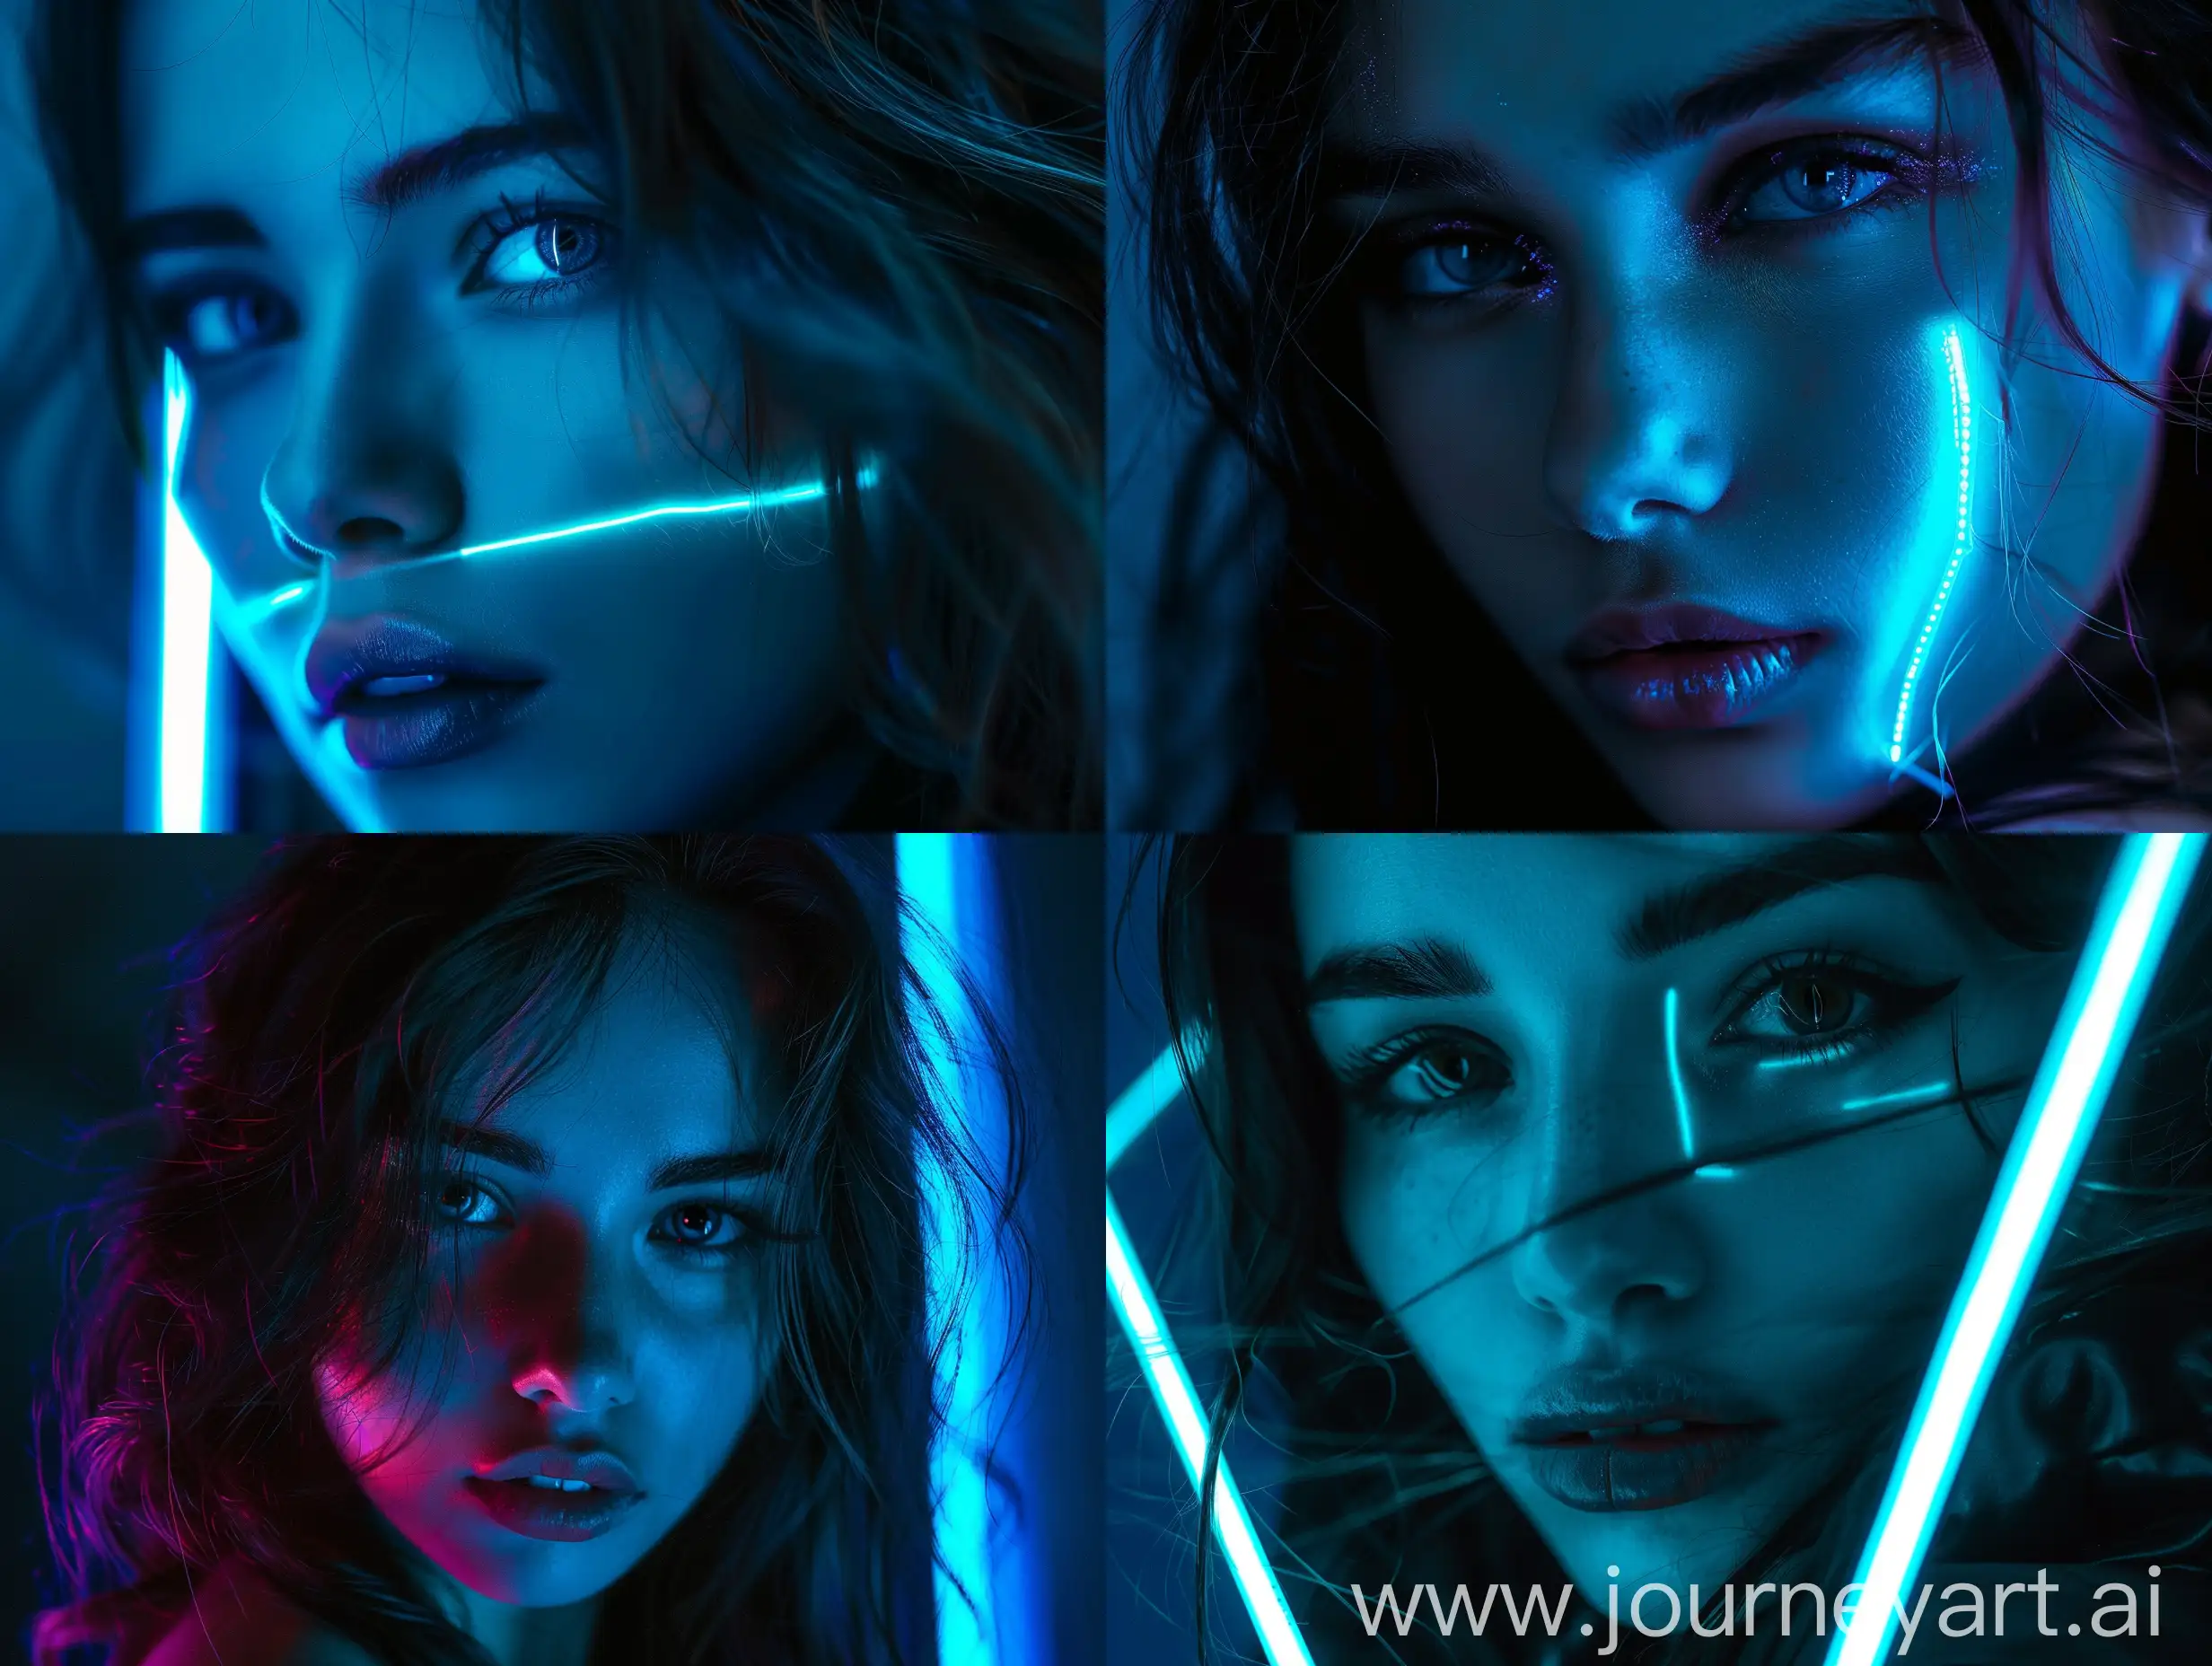 Dramatic-Portrait-of-a-Beautiful-Girl-with-Blue-Neon-Light-Accents